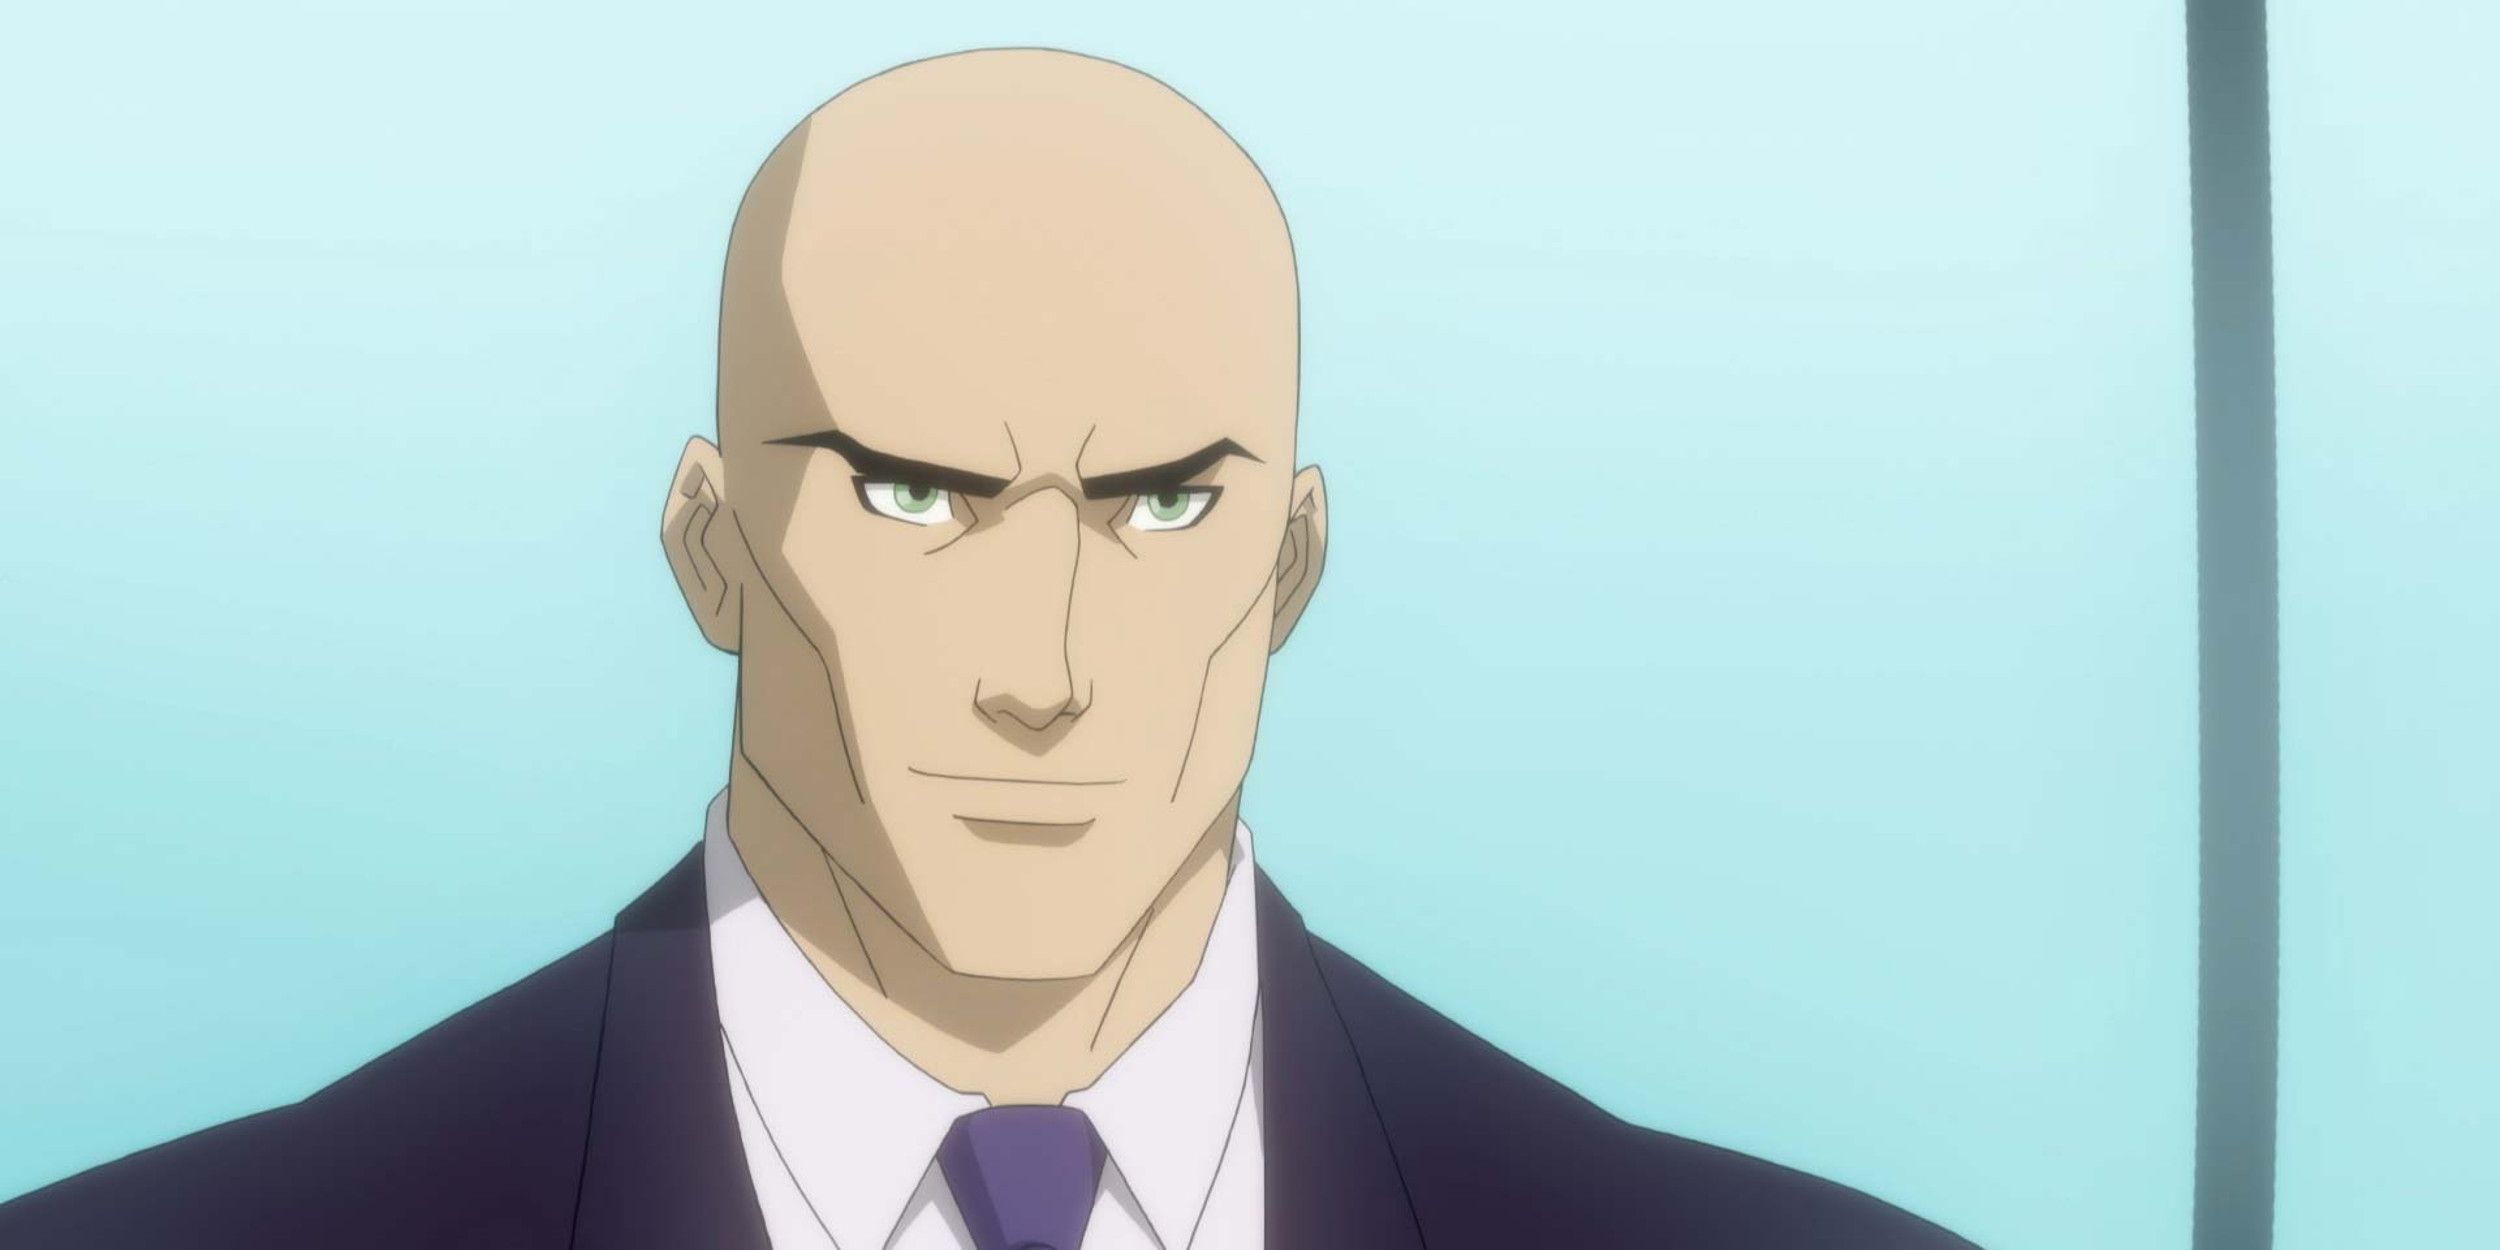 Lex Luthor frowning and smiling in Young Justice 